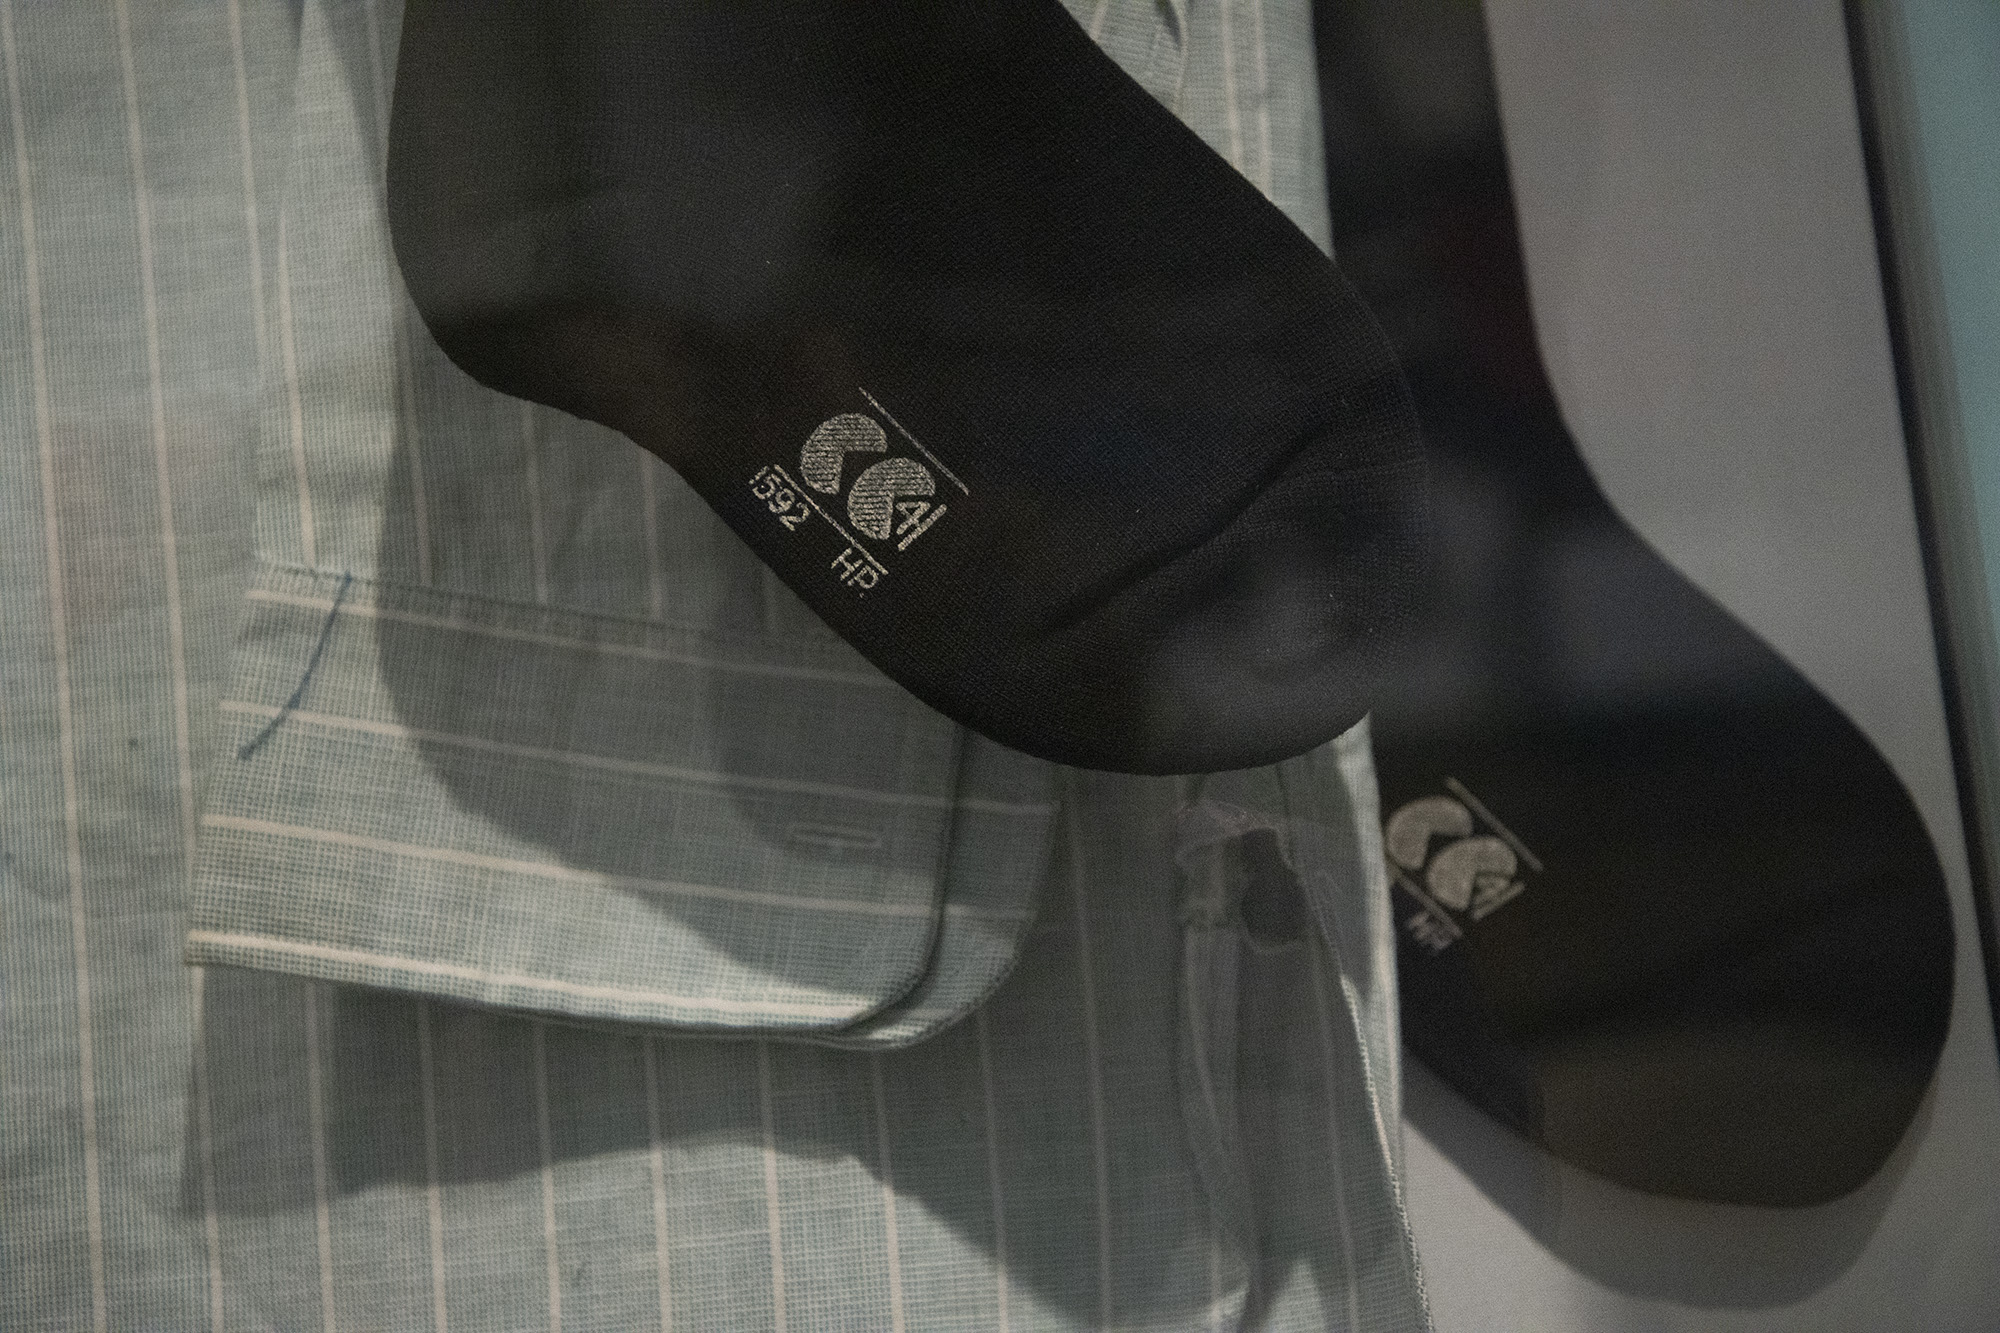 A pair of black socks bearing the "Civilian Clothing" logo, next to a blue and white striped shirt